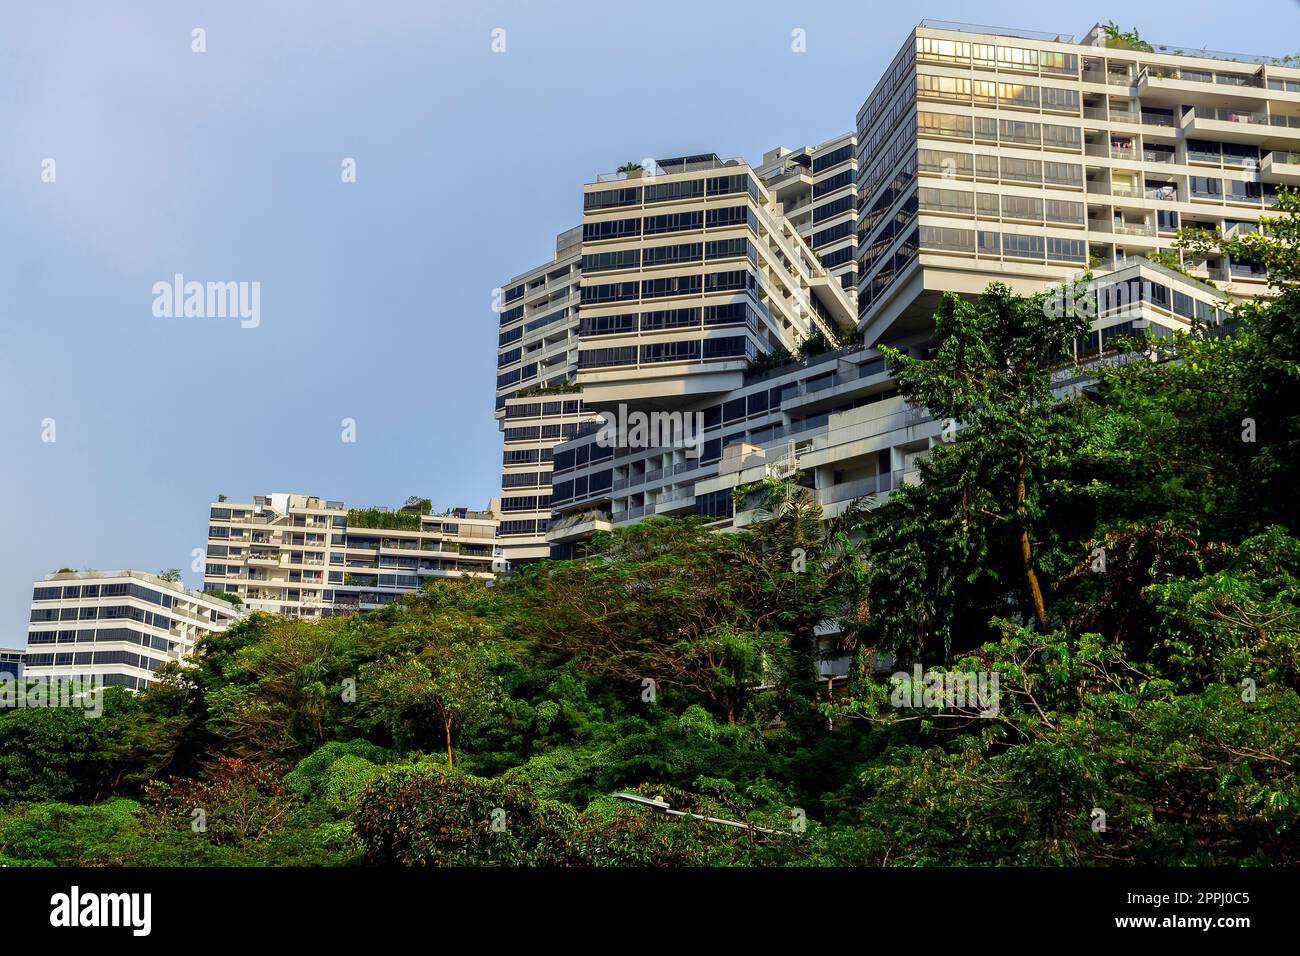 The Interlace is modern apartment buildings complex, Singapore. Designed by Ole Scheeren, partner of the Office for Metropolitan Architecture (OMA). Stock Photo